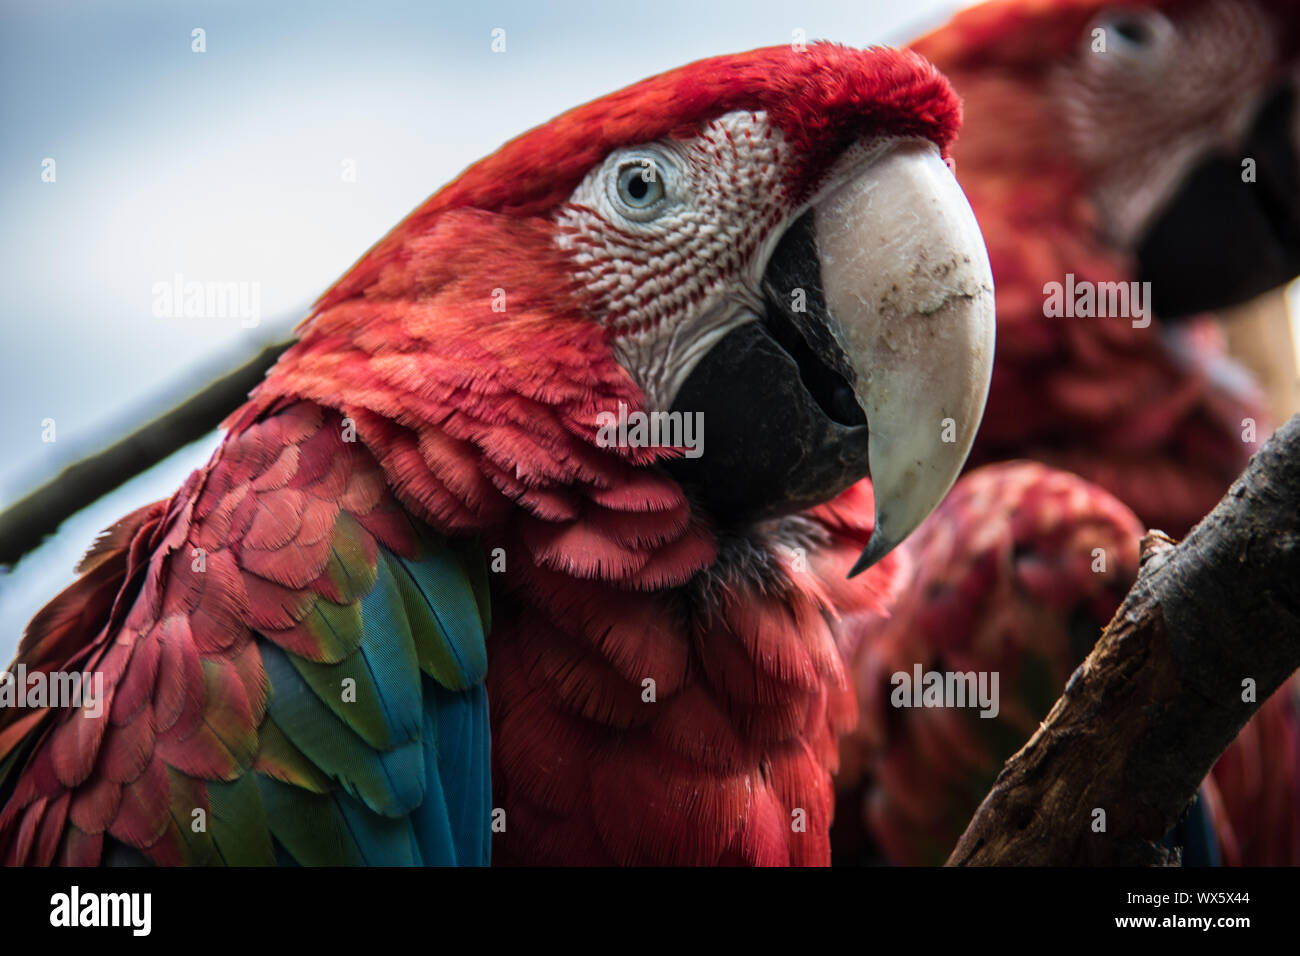 Parrots from South America Stock Photo